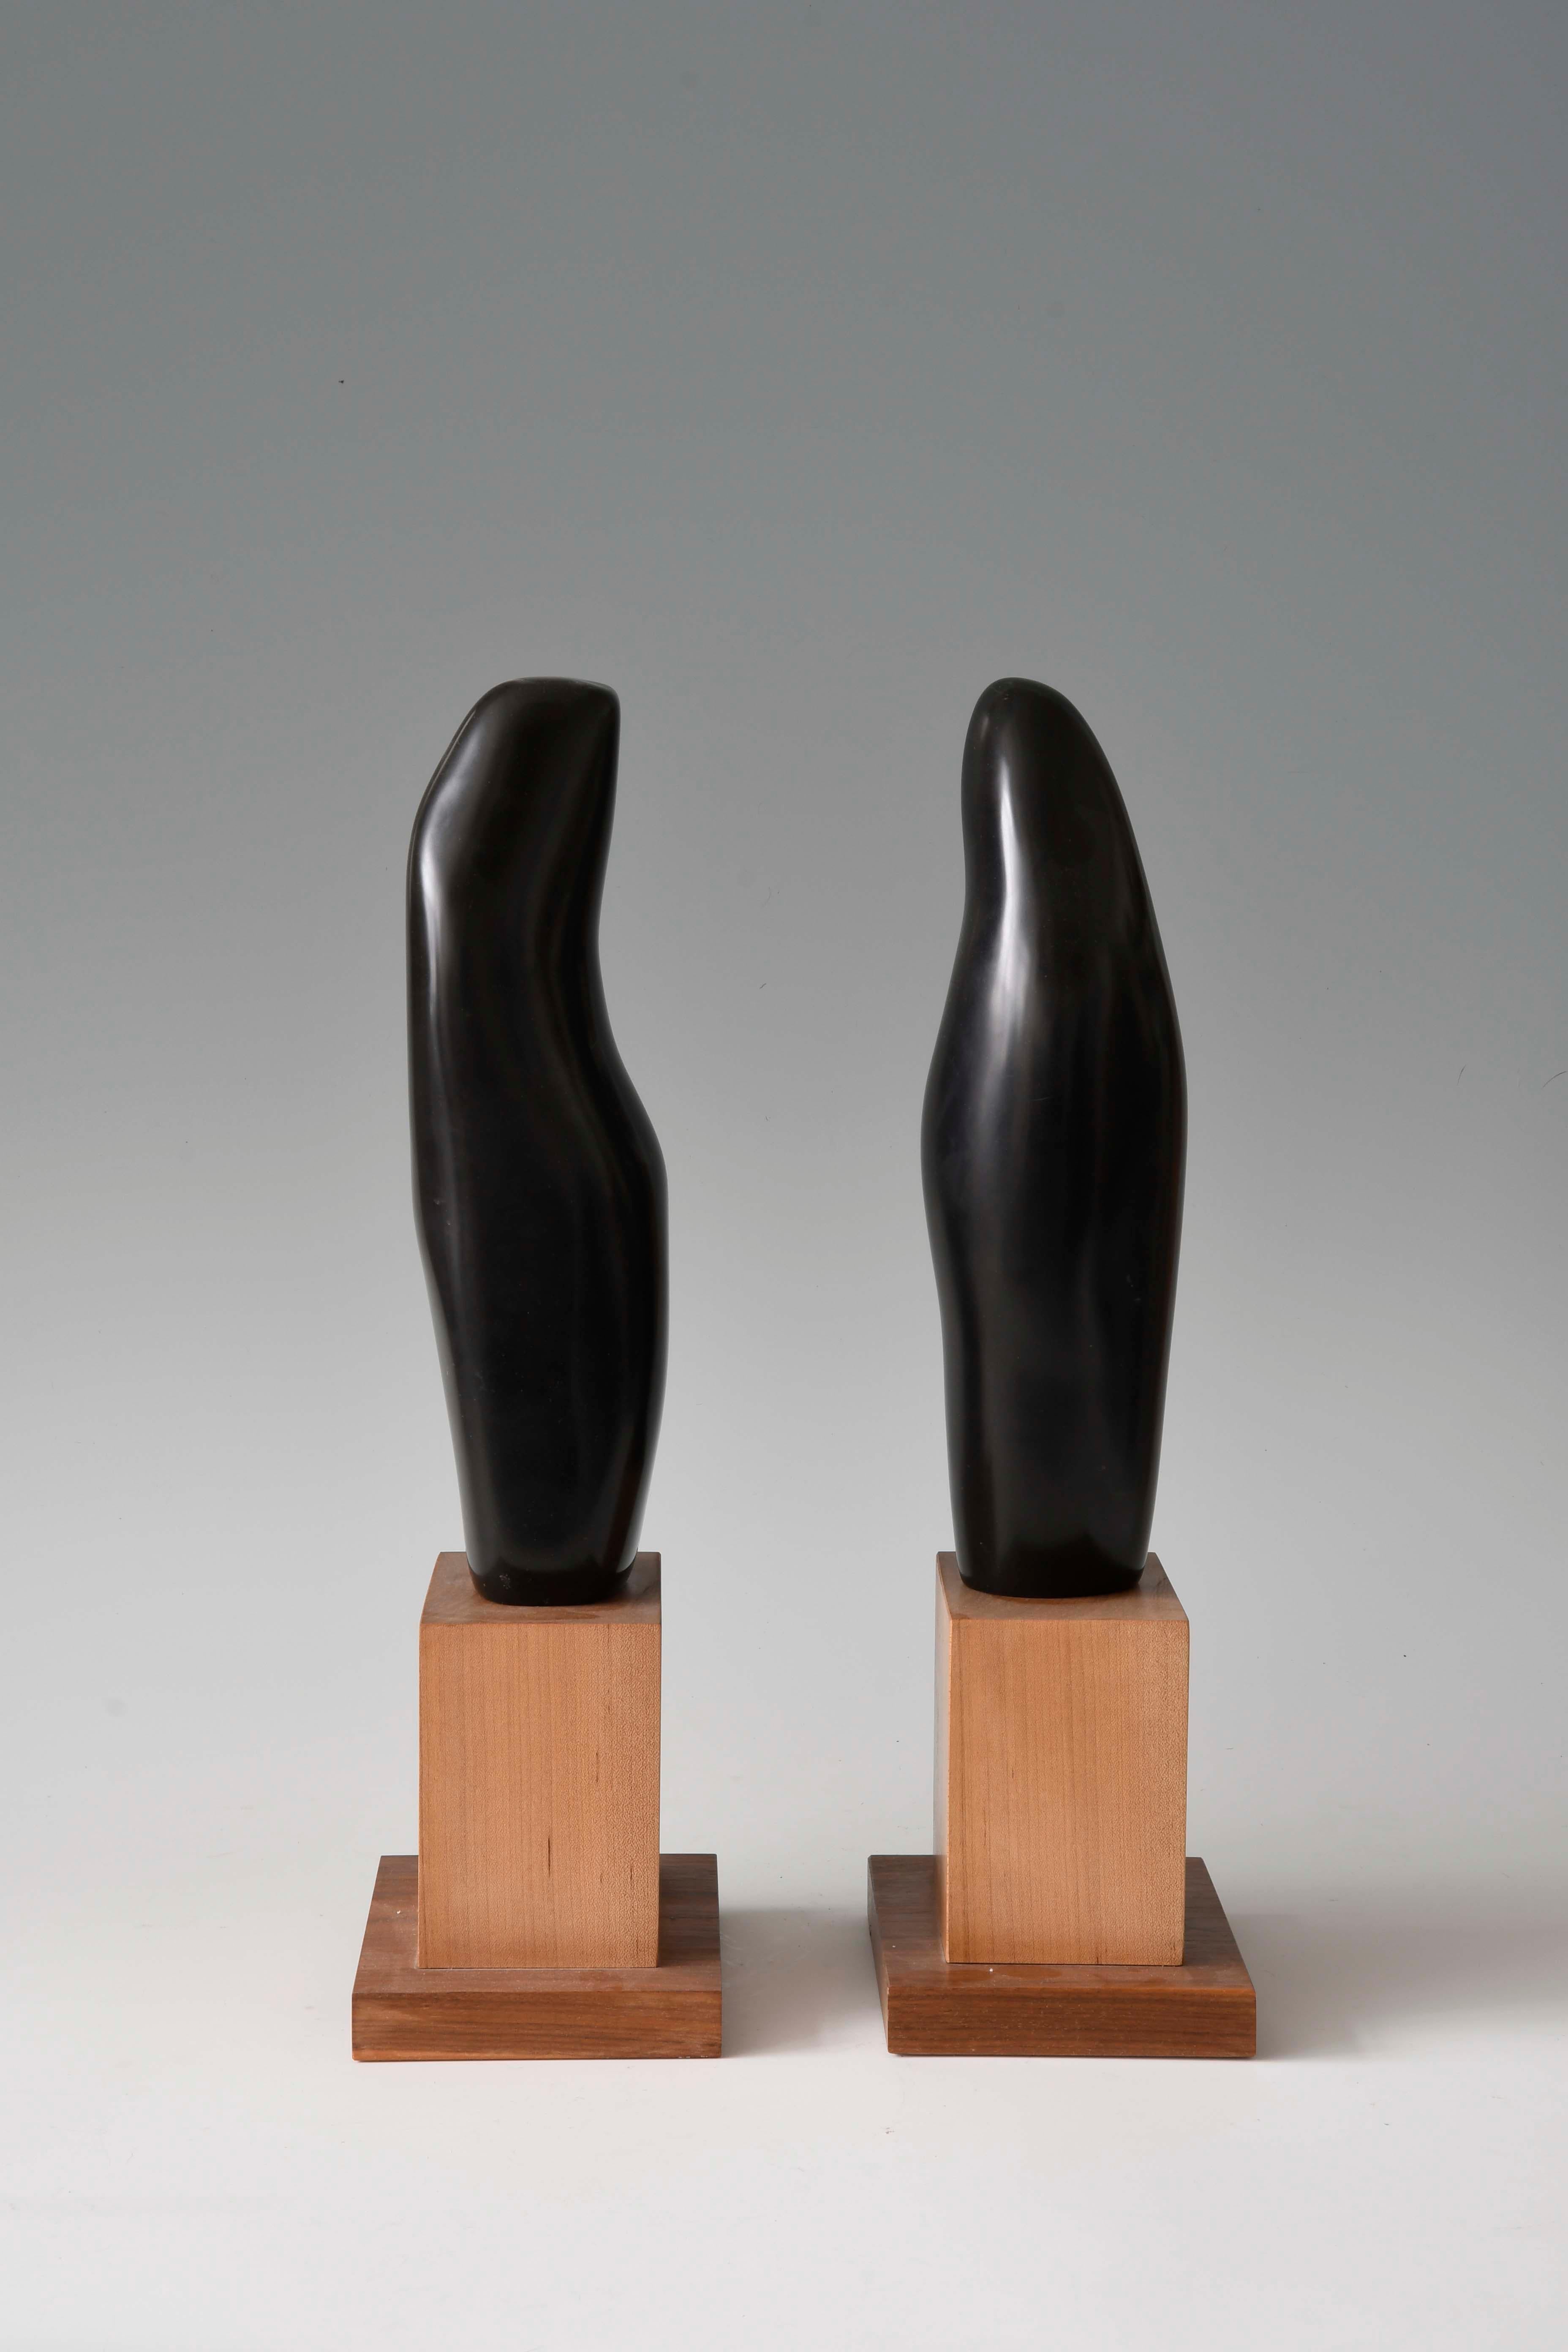 Sinuous Dance, sculpture of two abstracted figures, black marble with wood base - Sculpture by Lilian R Engel